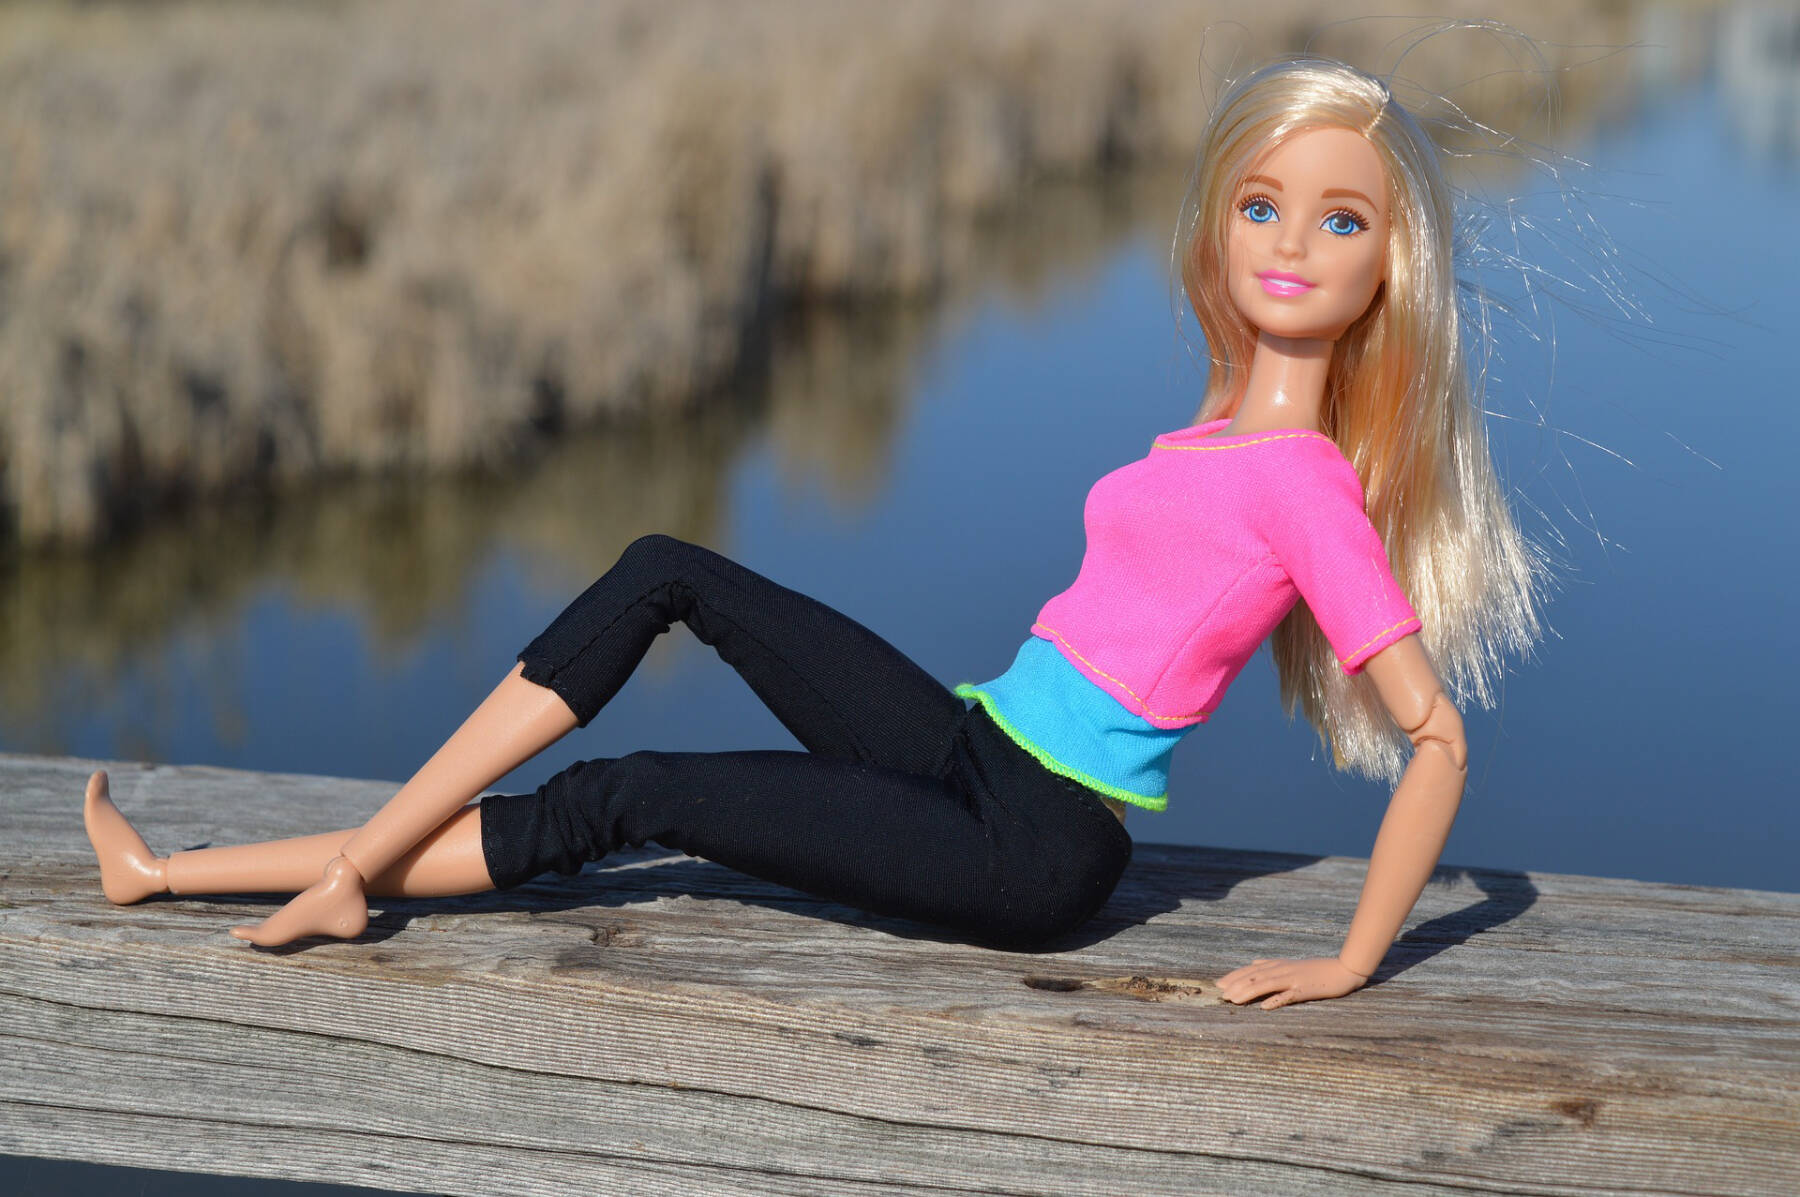 The iconic Barbie doll has been a part of popular culture since 1959. What is Barbie’s last name? (Pixabay.com)